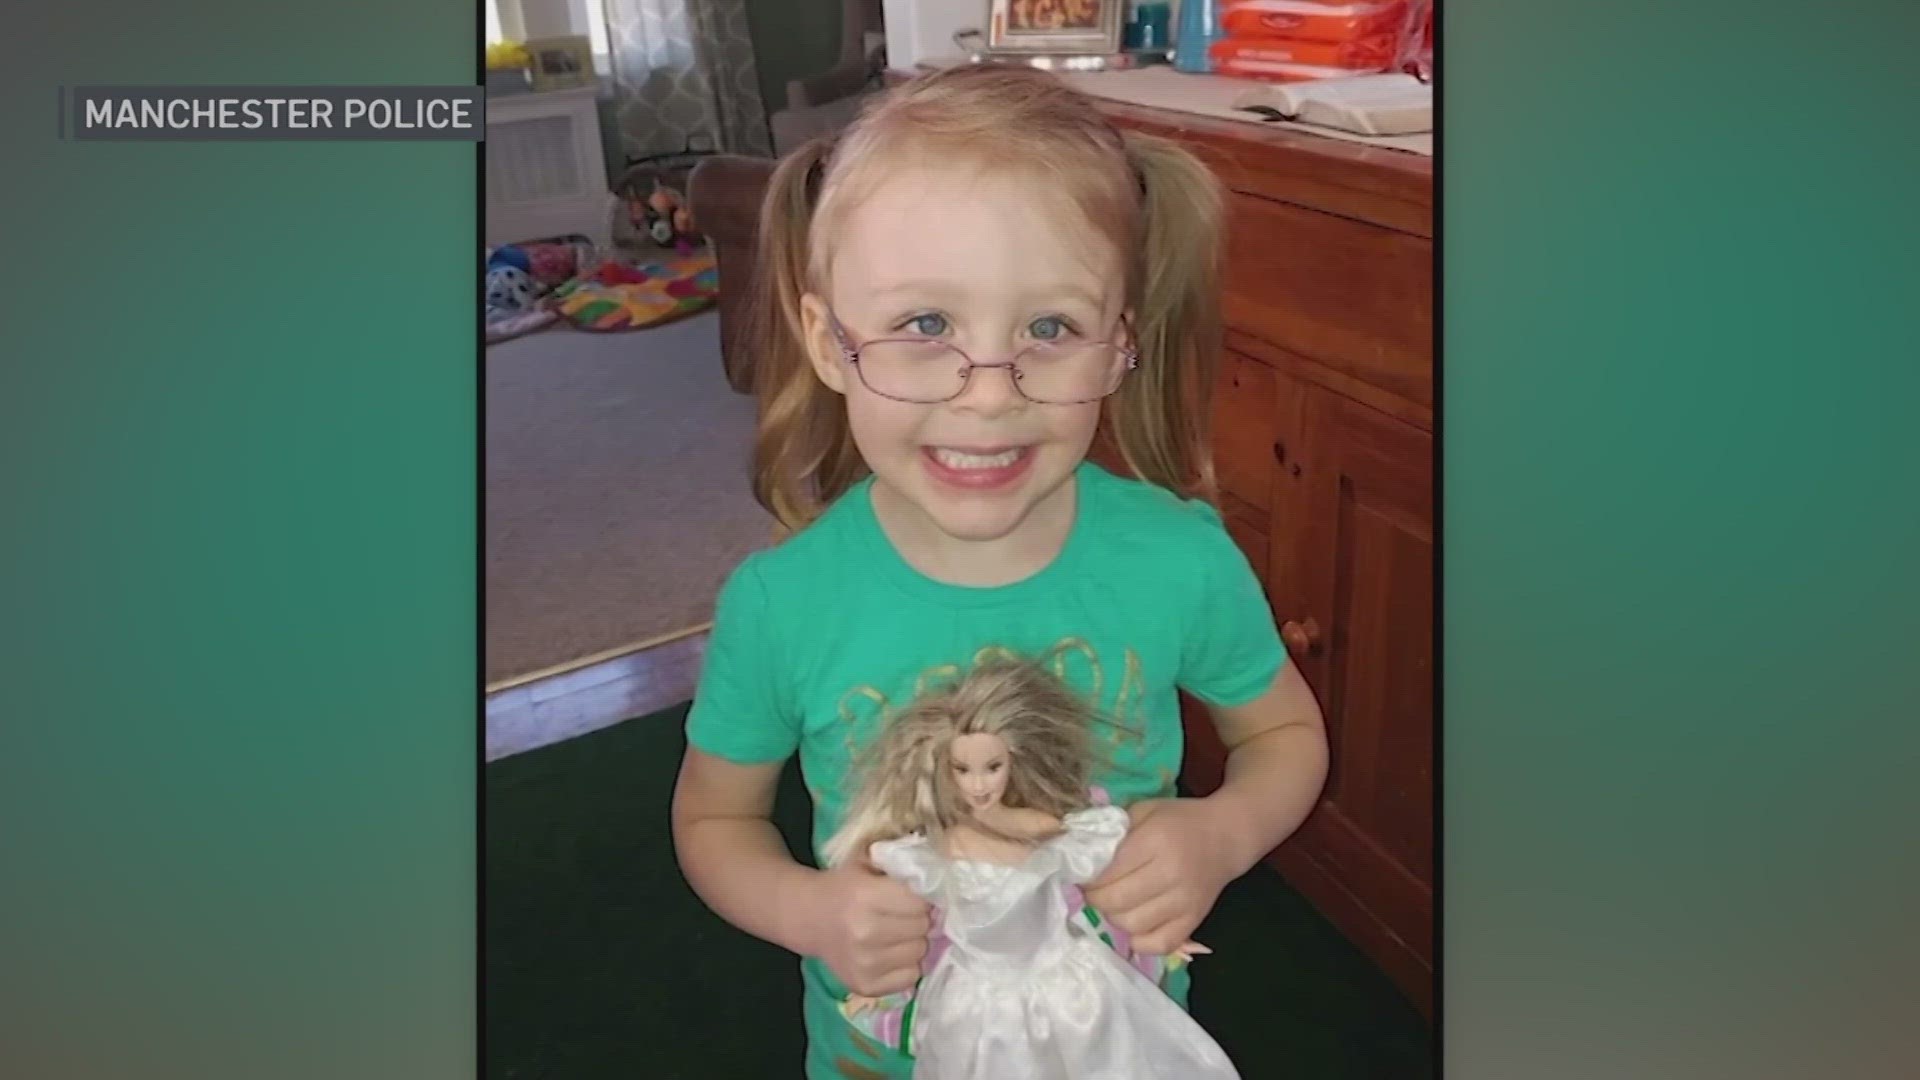 Authorities believe Adam Montgomery killed the girl on Dec. 7, 2019, but she wasn’t reported missing until nearly two years later.